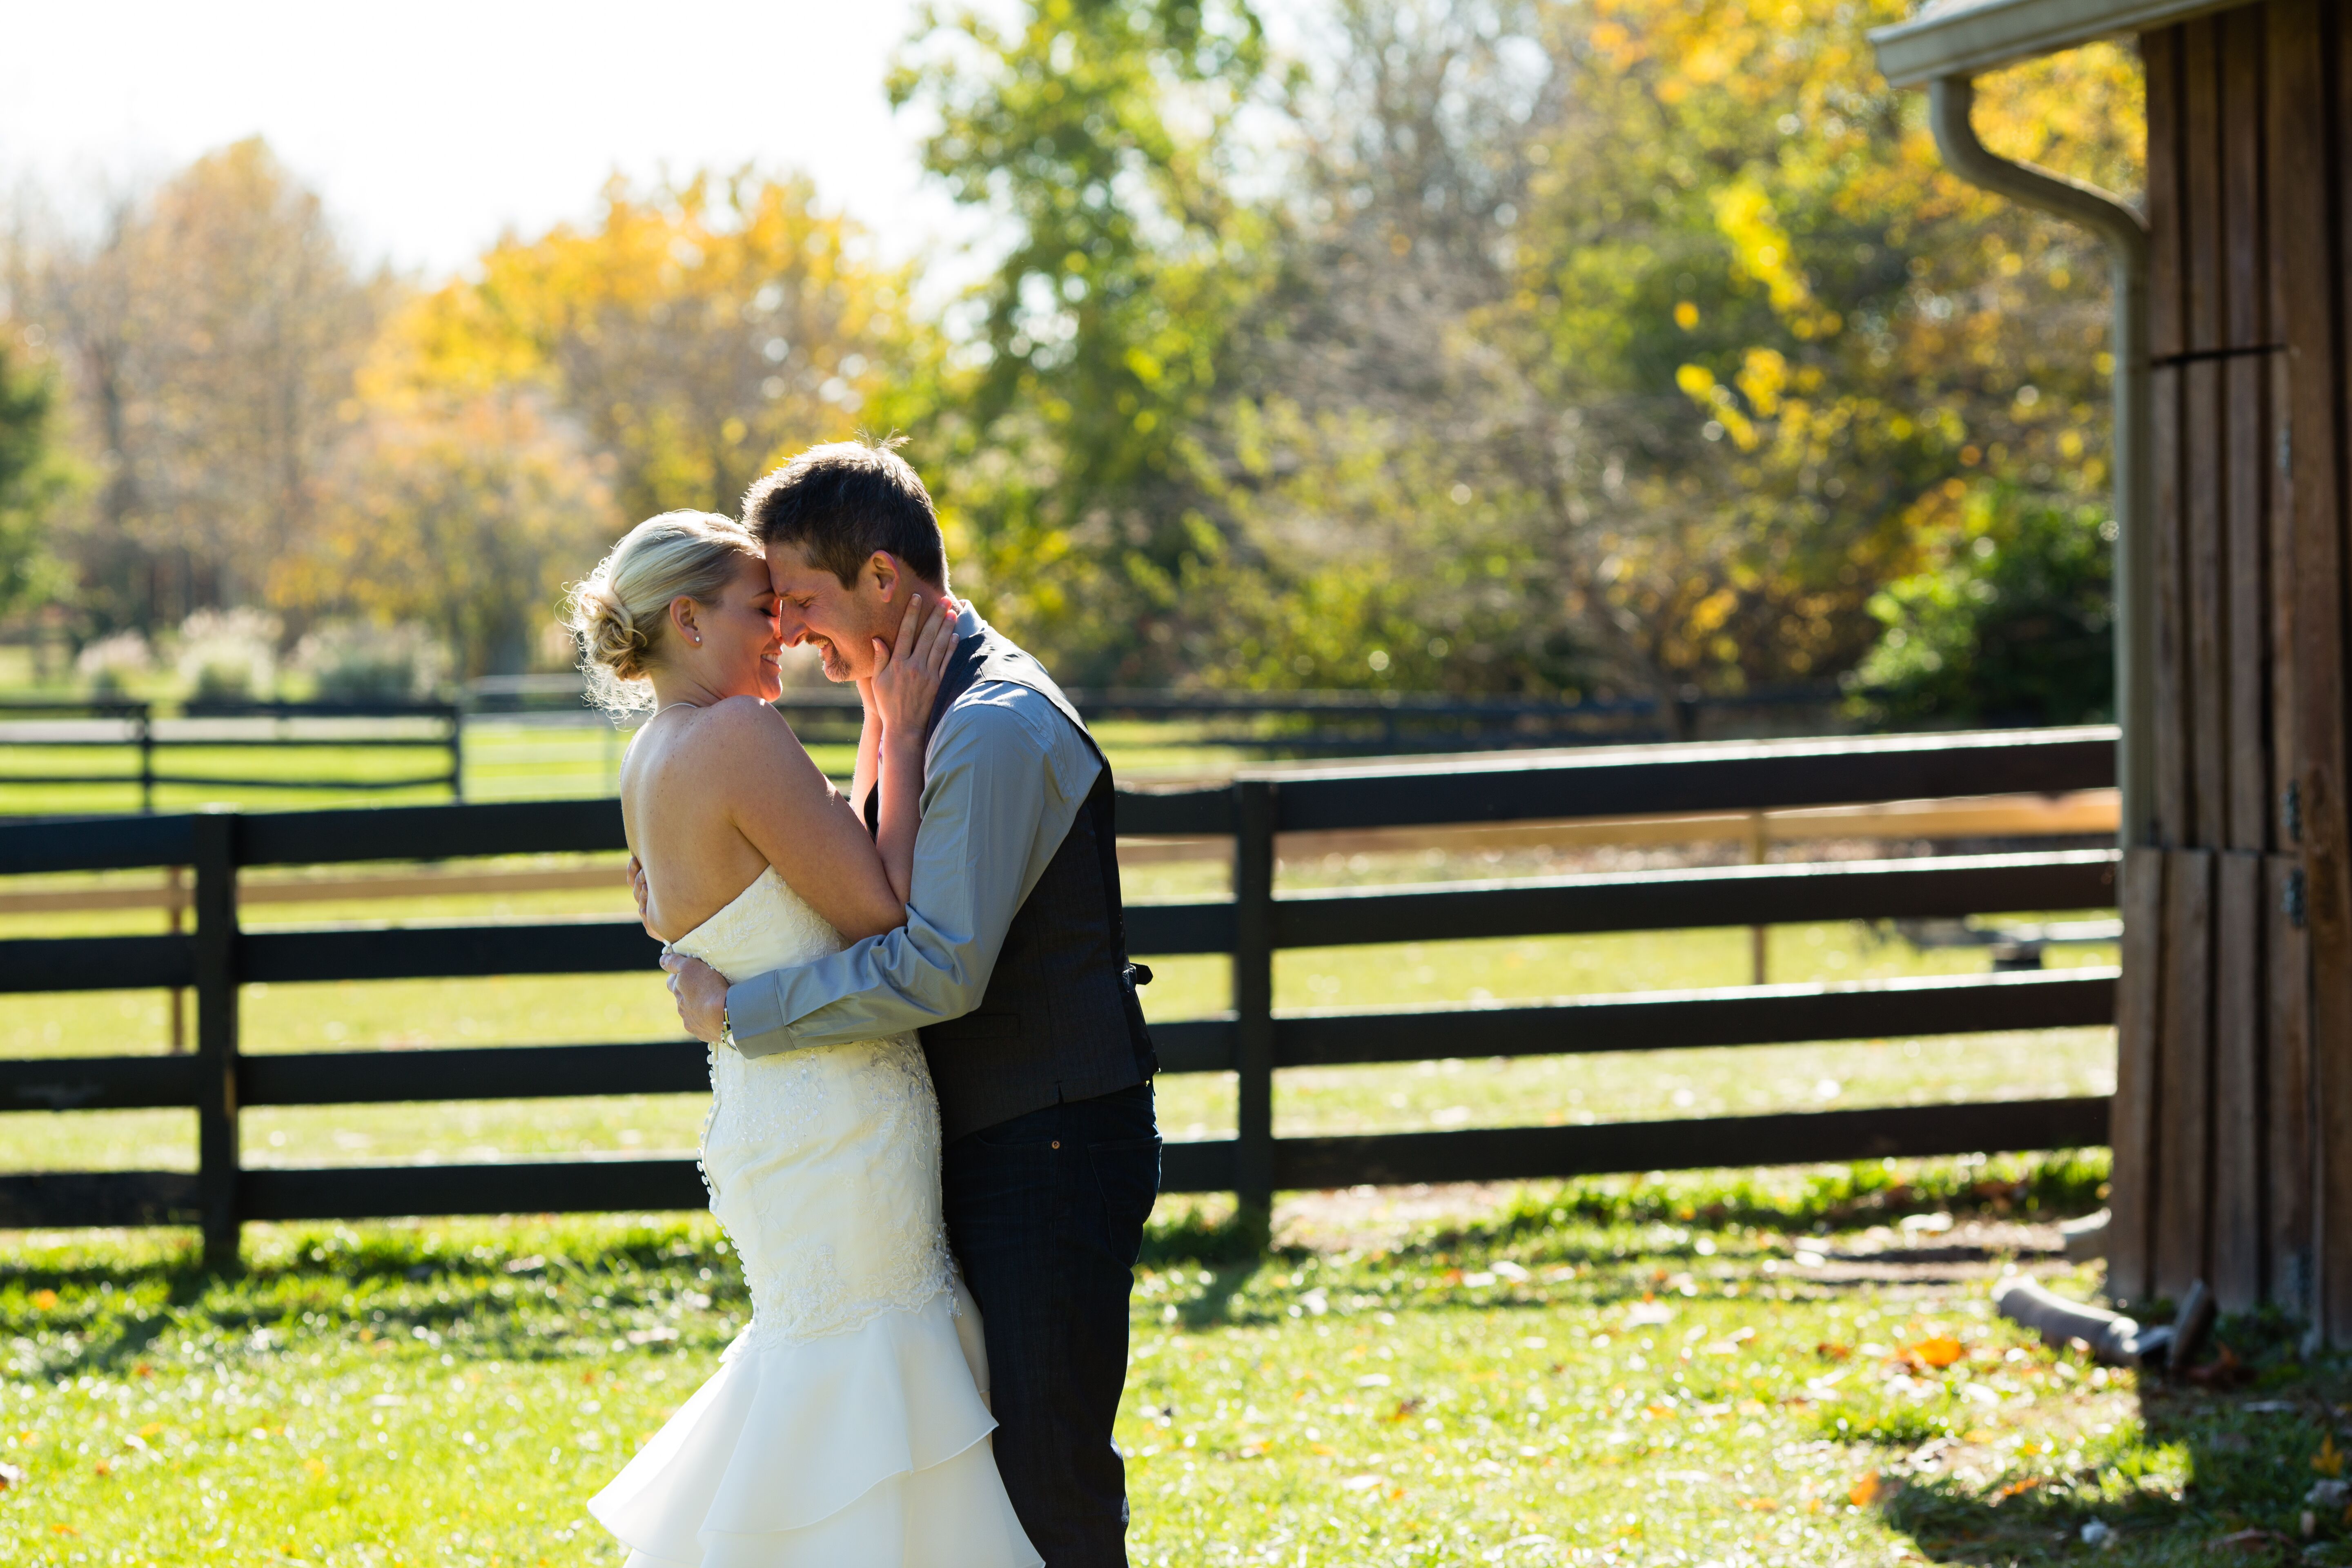 A Casual Rustic Wedding  at the Barn in Zionsville  in 